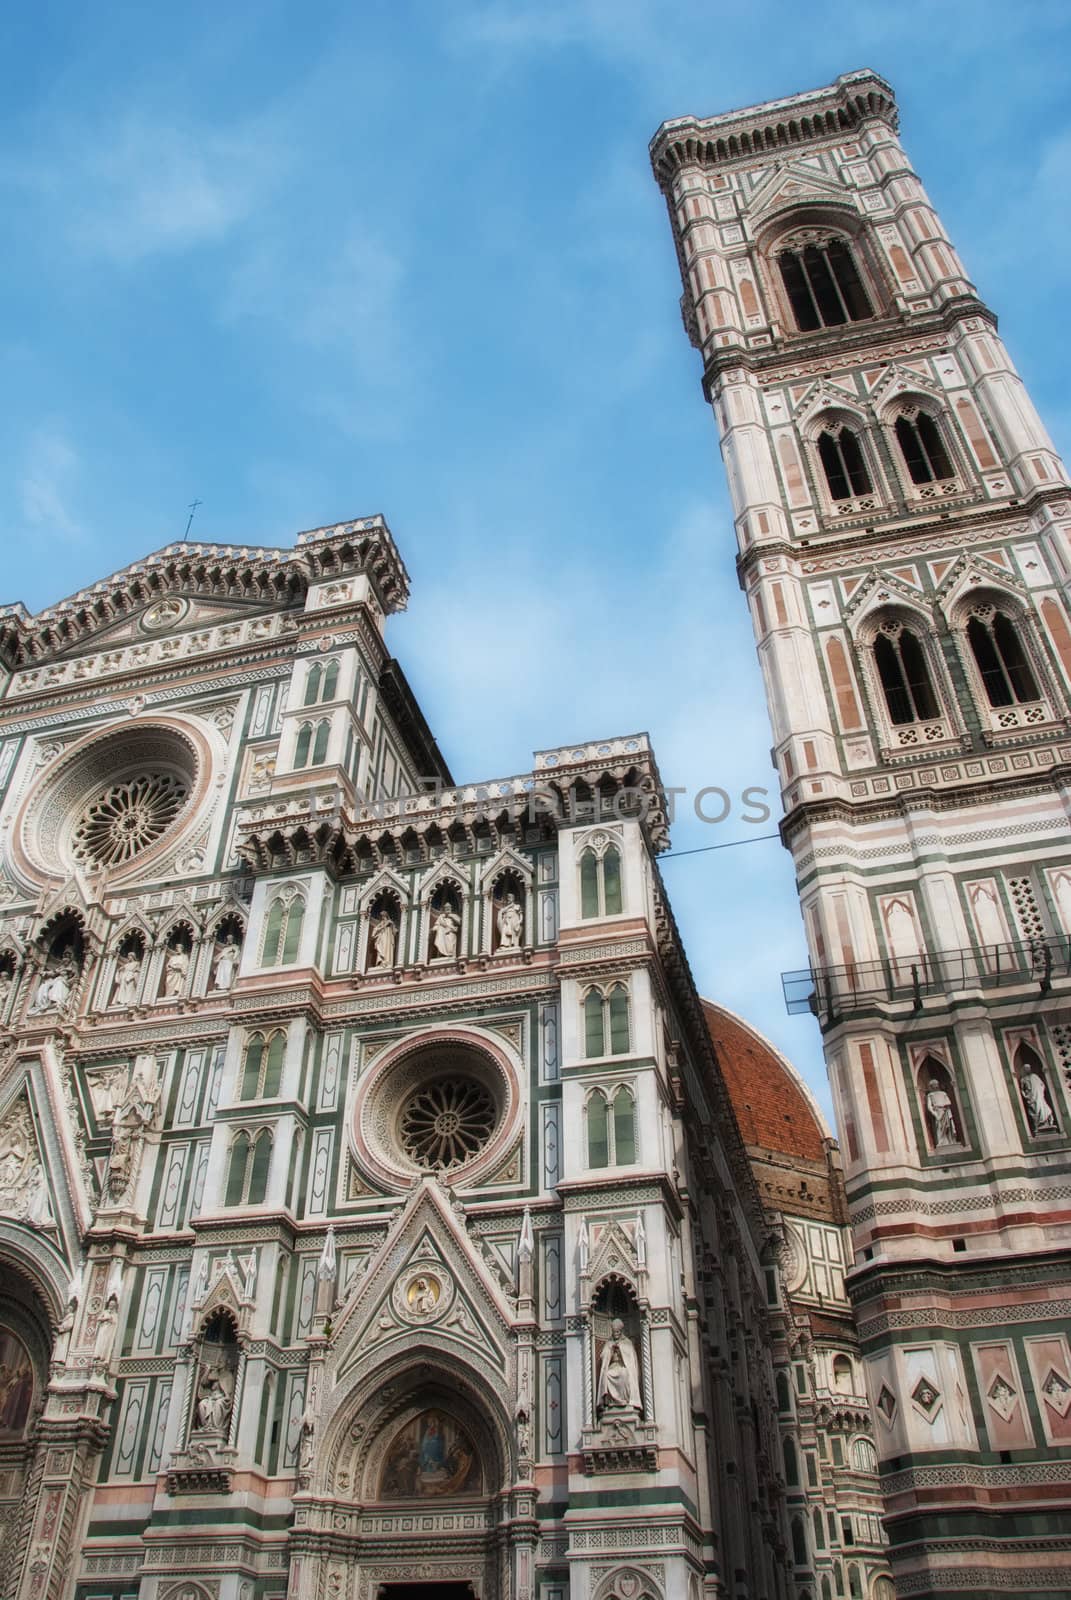 Architectural Detail of Piazza del Duomo in Florence, Italy